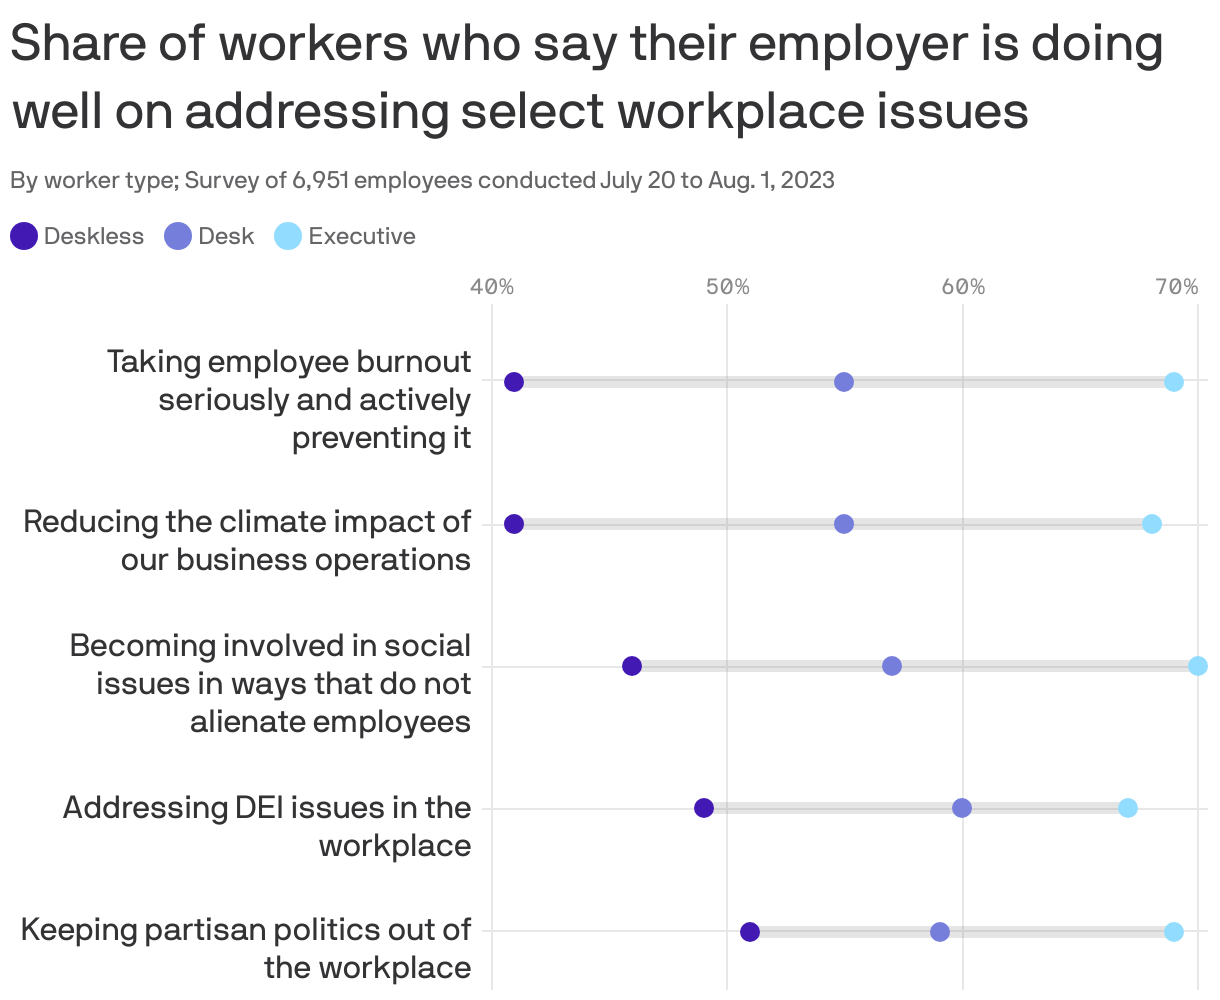 Share of workers who say their employer is doing well on addressing select workplace issues